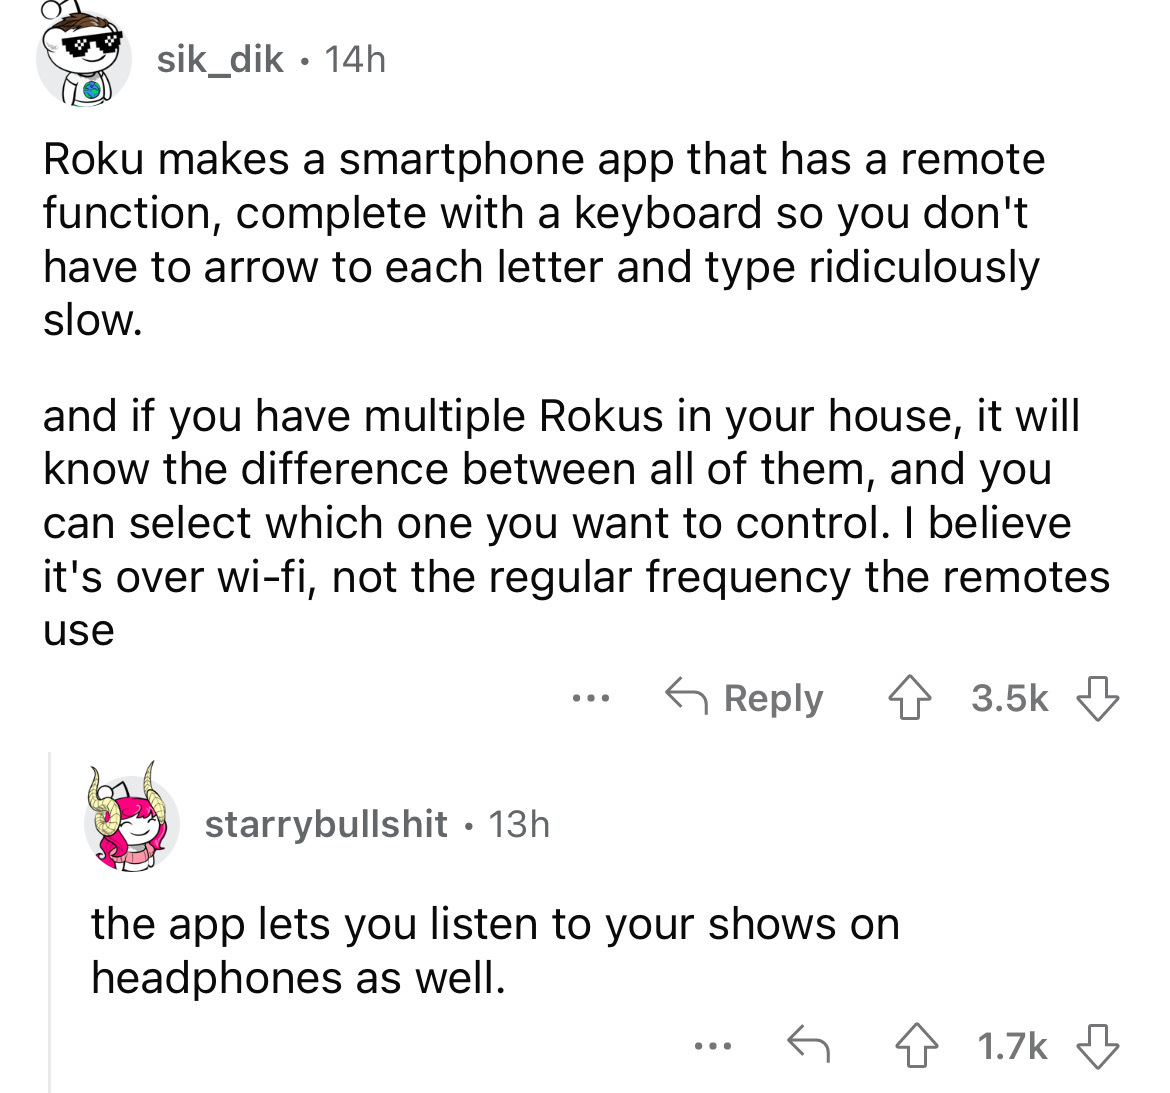 angle - sik_dik 14h Roku makes a smartphone app that has a remote function, complete with a keyboard so you don't have to arrow to each letter and type ridiculously slow. and if you have multiple Rokus in your house, it will know the difference between al